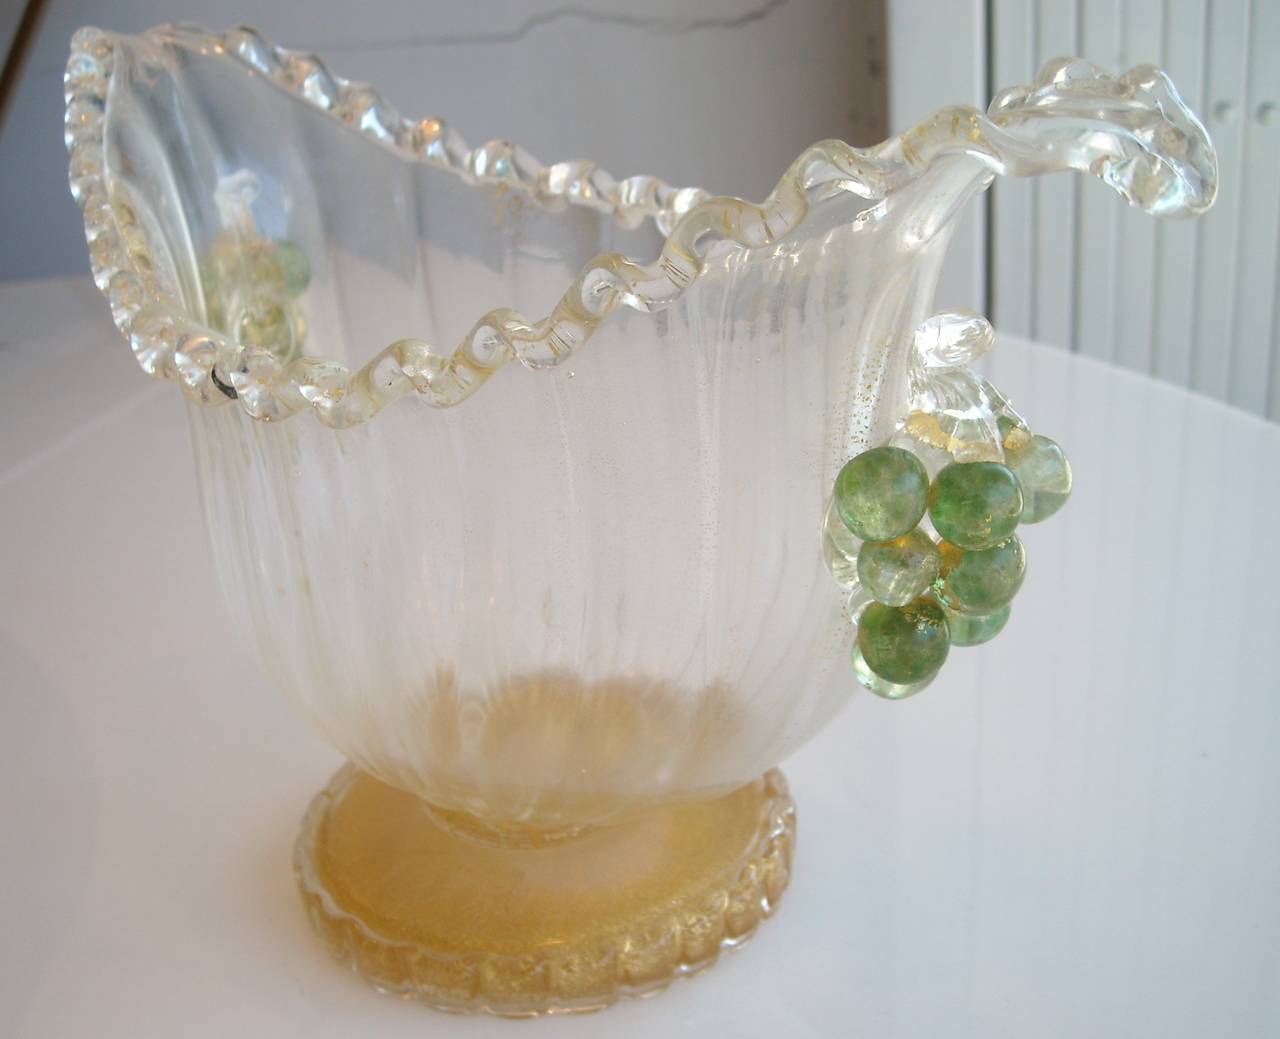 Hand-Crafted Ercole Barovier Murano Glass and Gold Centerpiece or Vase for Artistica Barovier